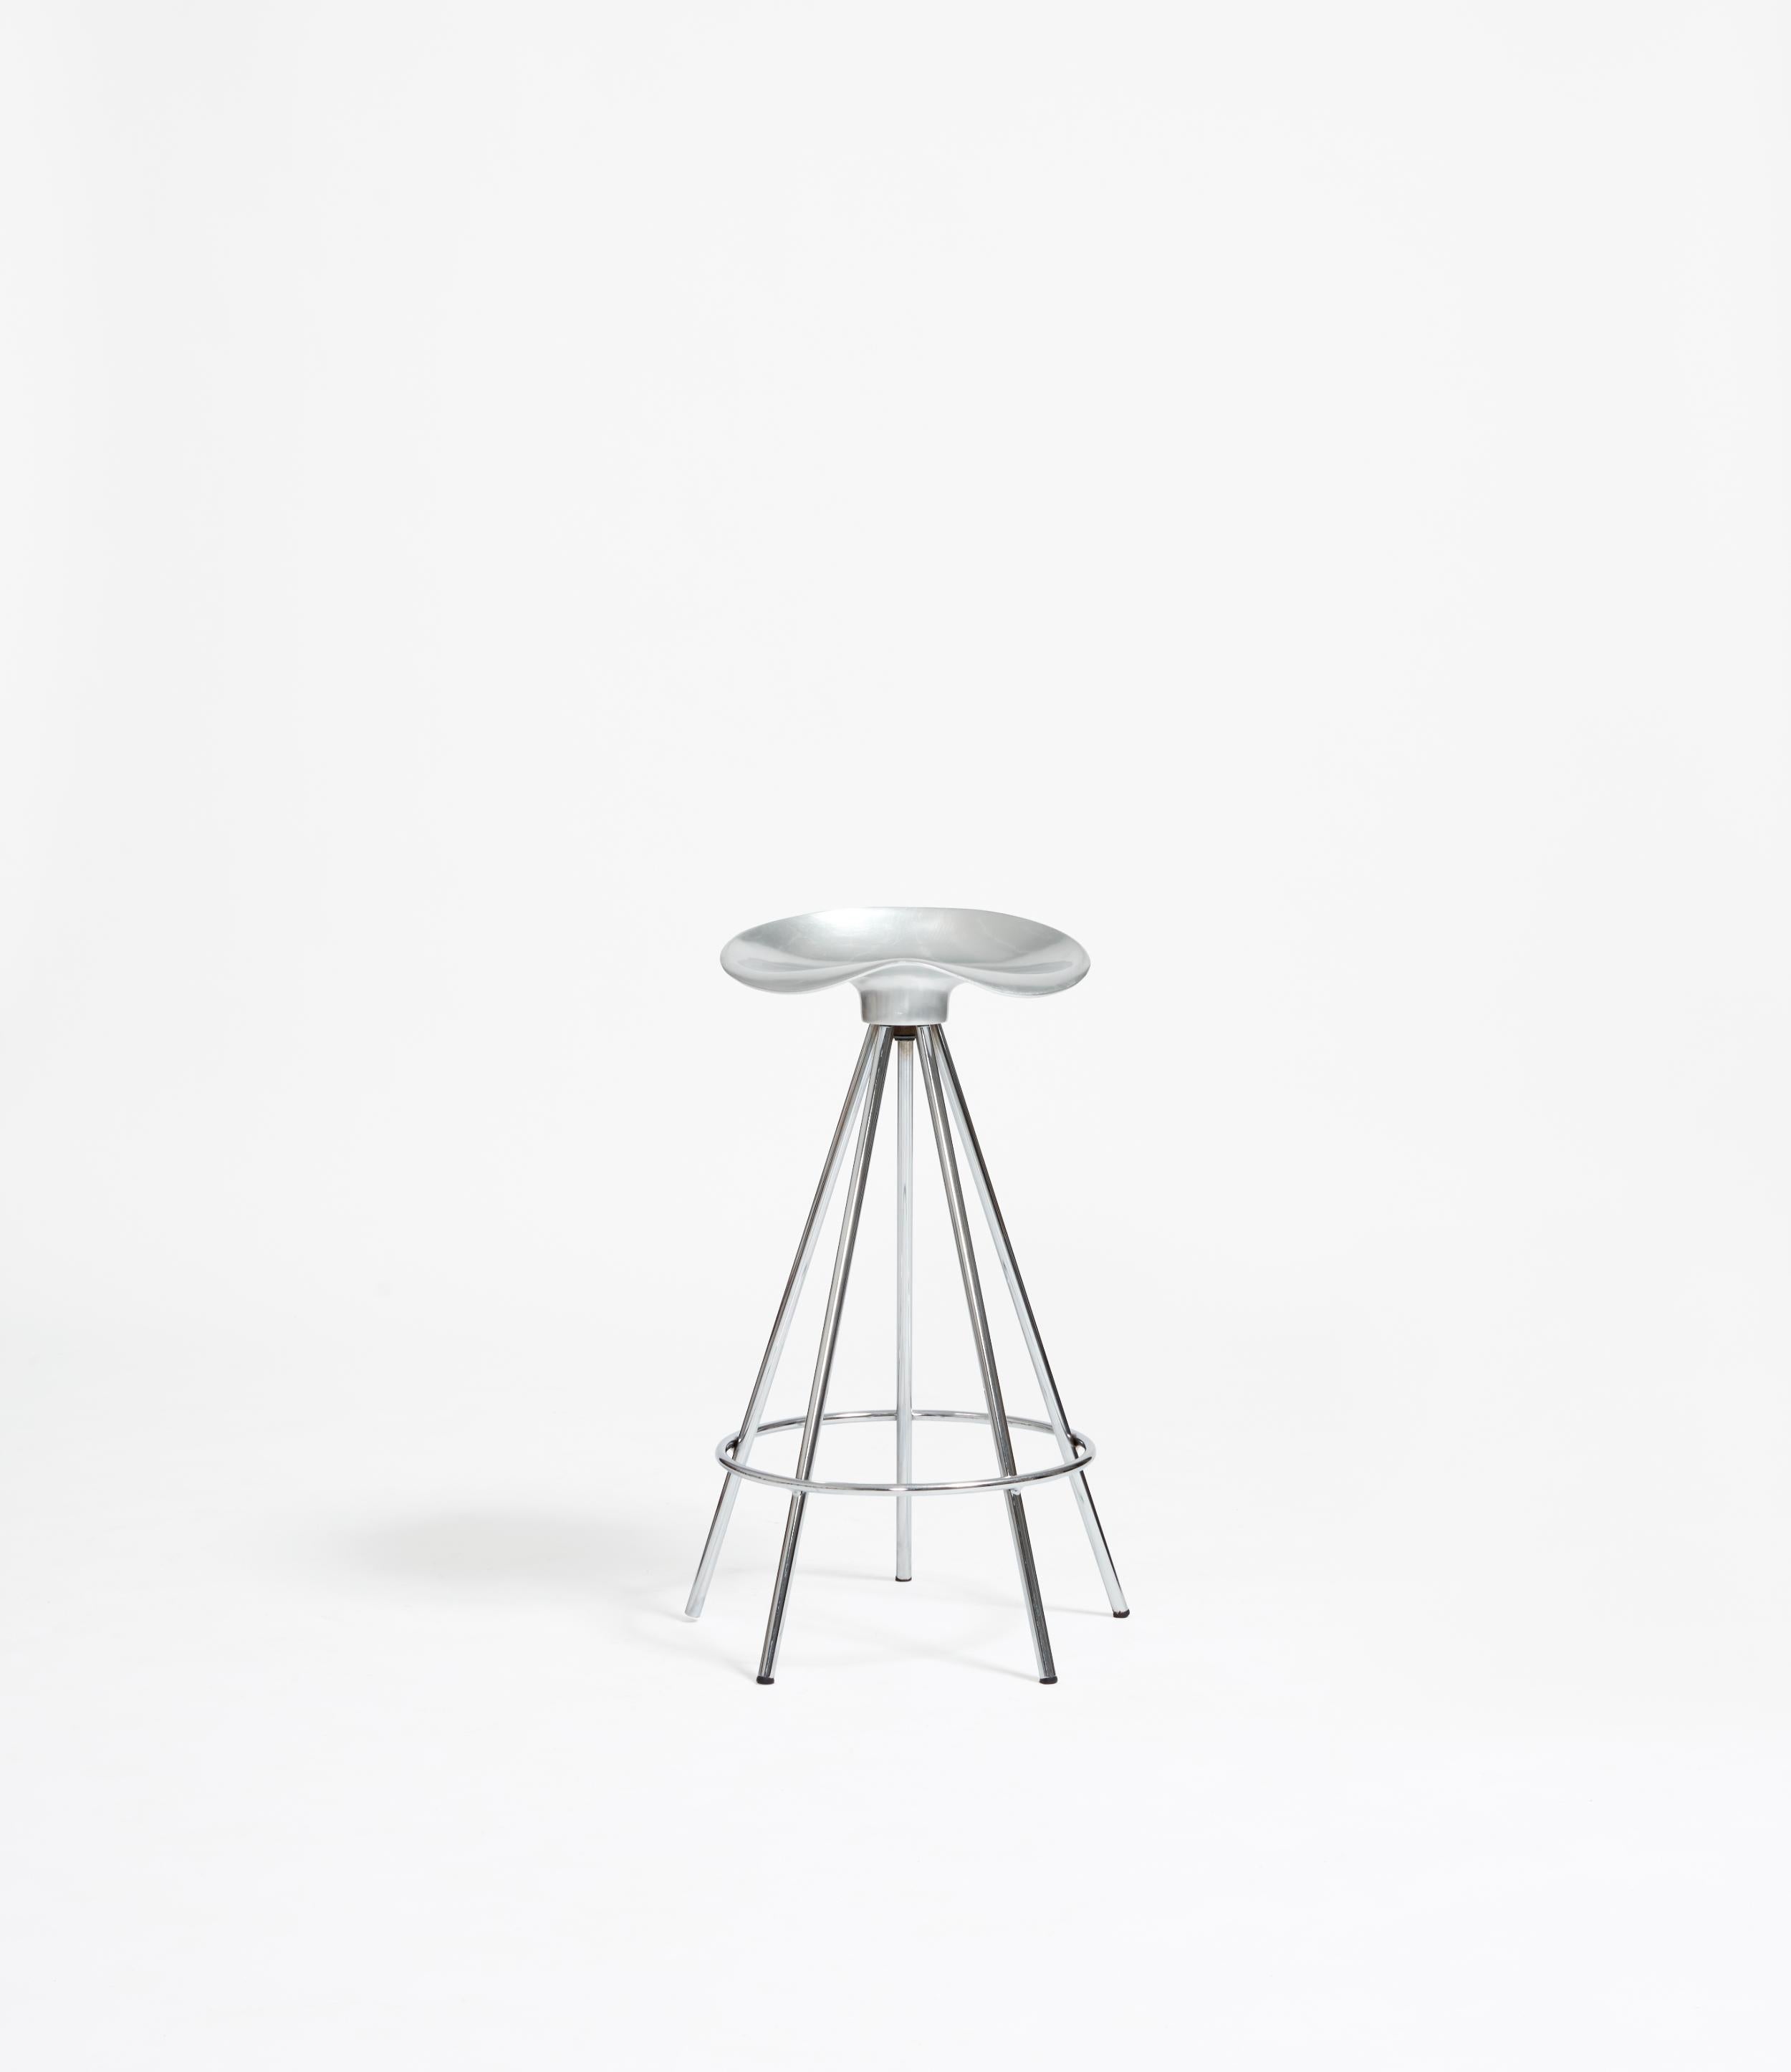 The Jamaica Stool is an essential showcase of modernity in the 1990s. With the millennium fast approaching, the thematic sense of futurism is noted in its contoured seat; aligned with the use of aluminium for the feeling of a refined ascent into a